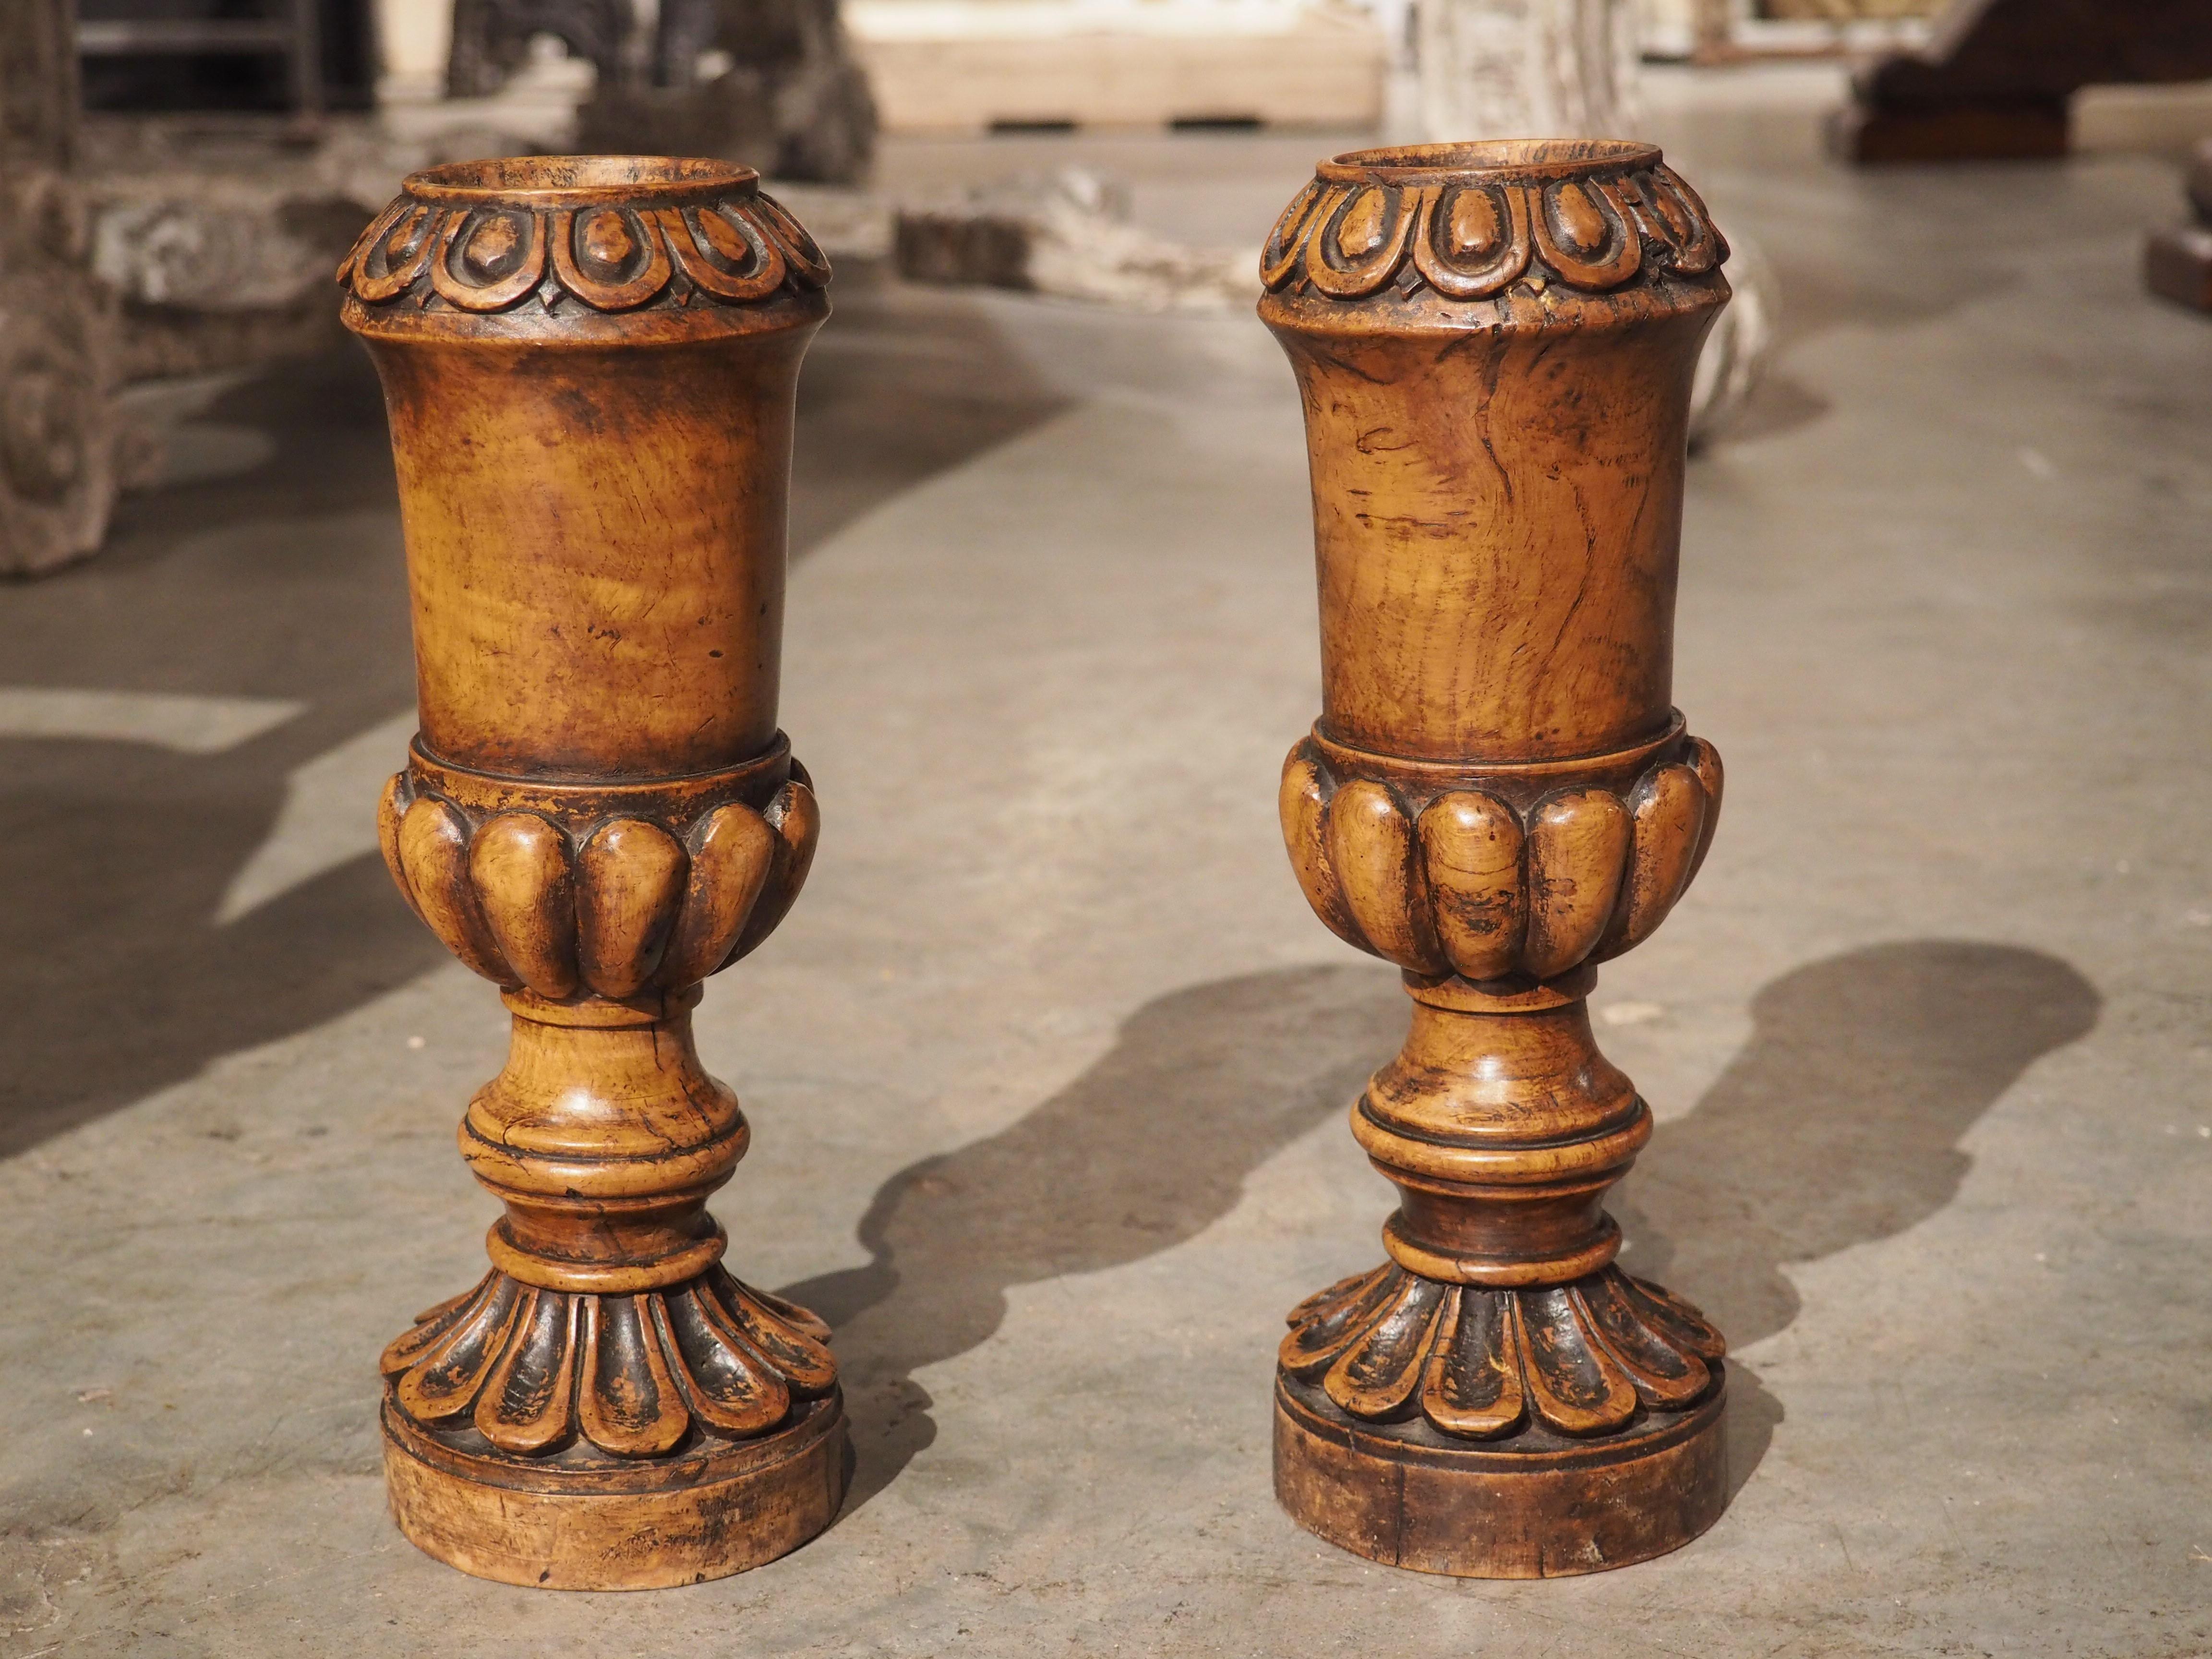 Pair of circa 1820 Carved Walnut Spill Vases from England For Sale 10